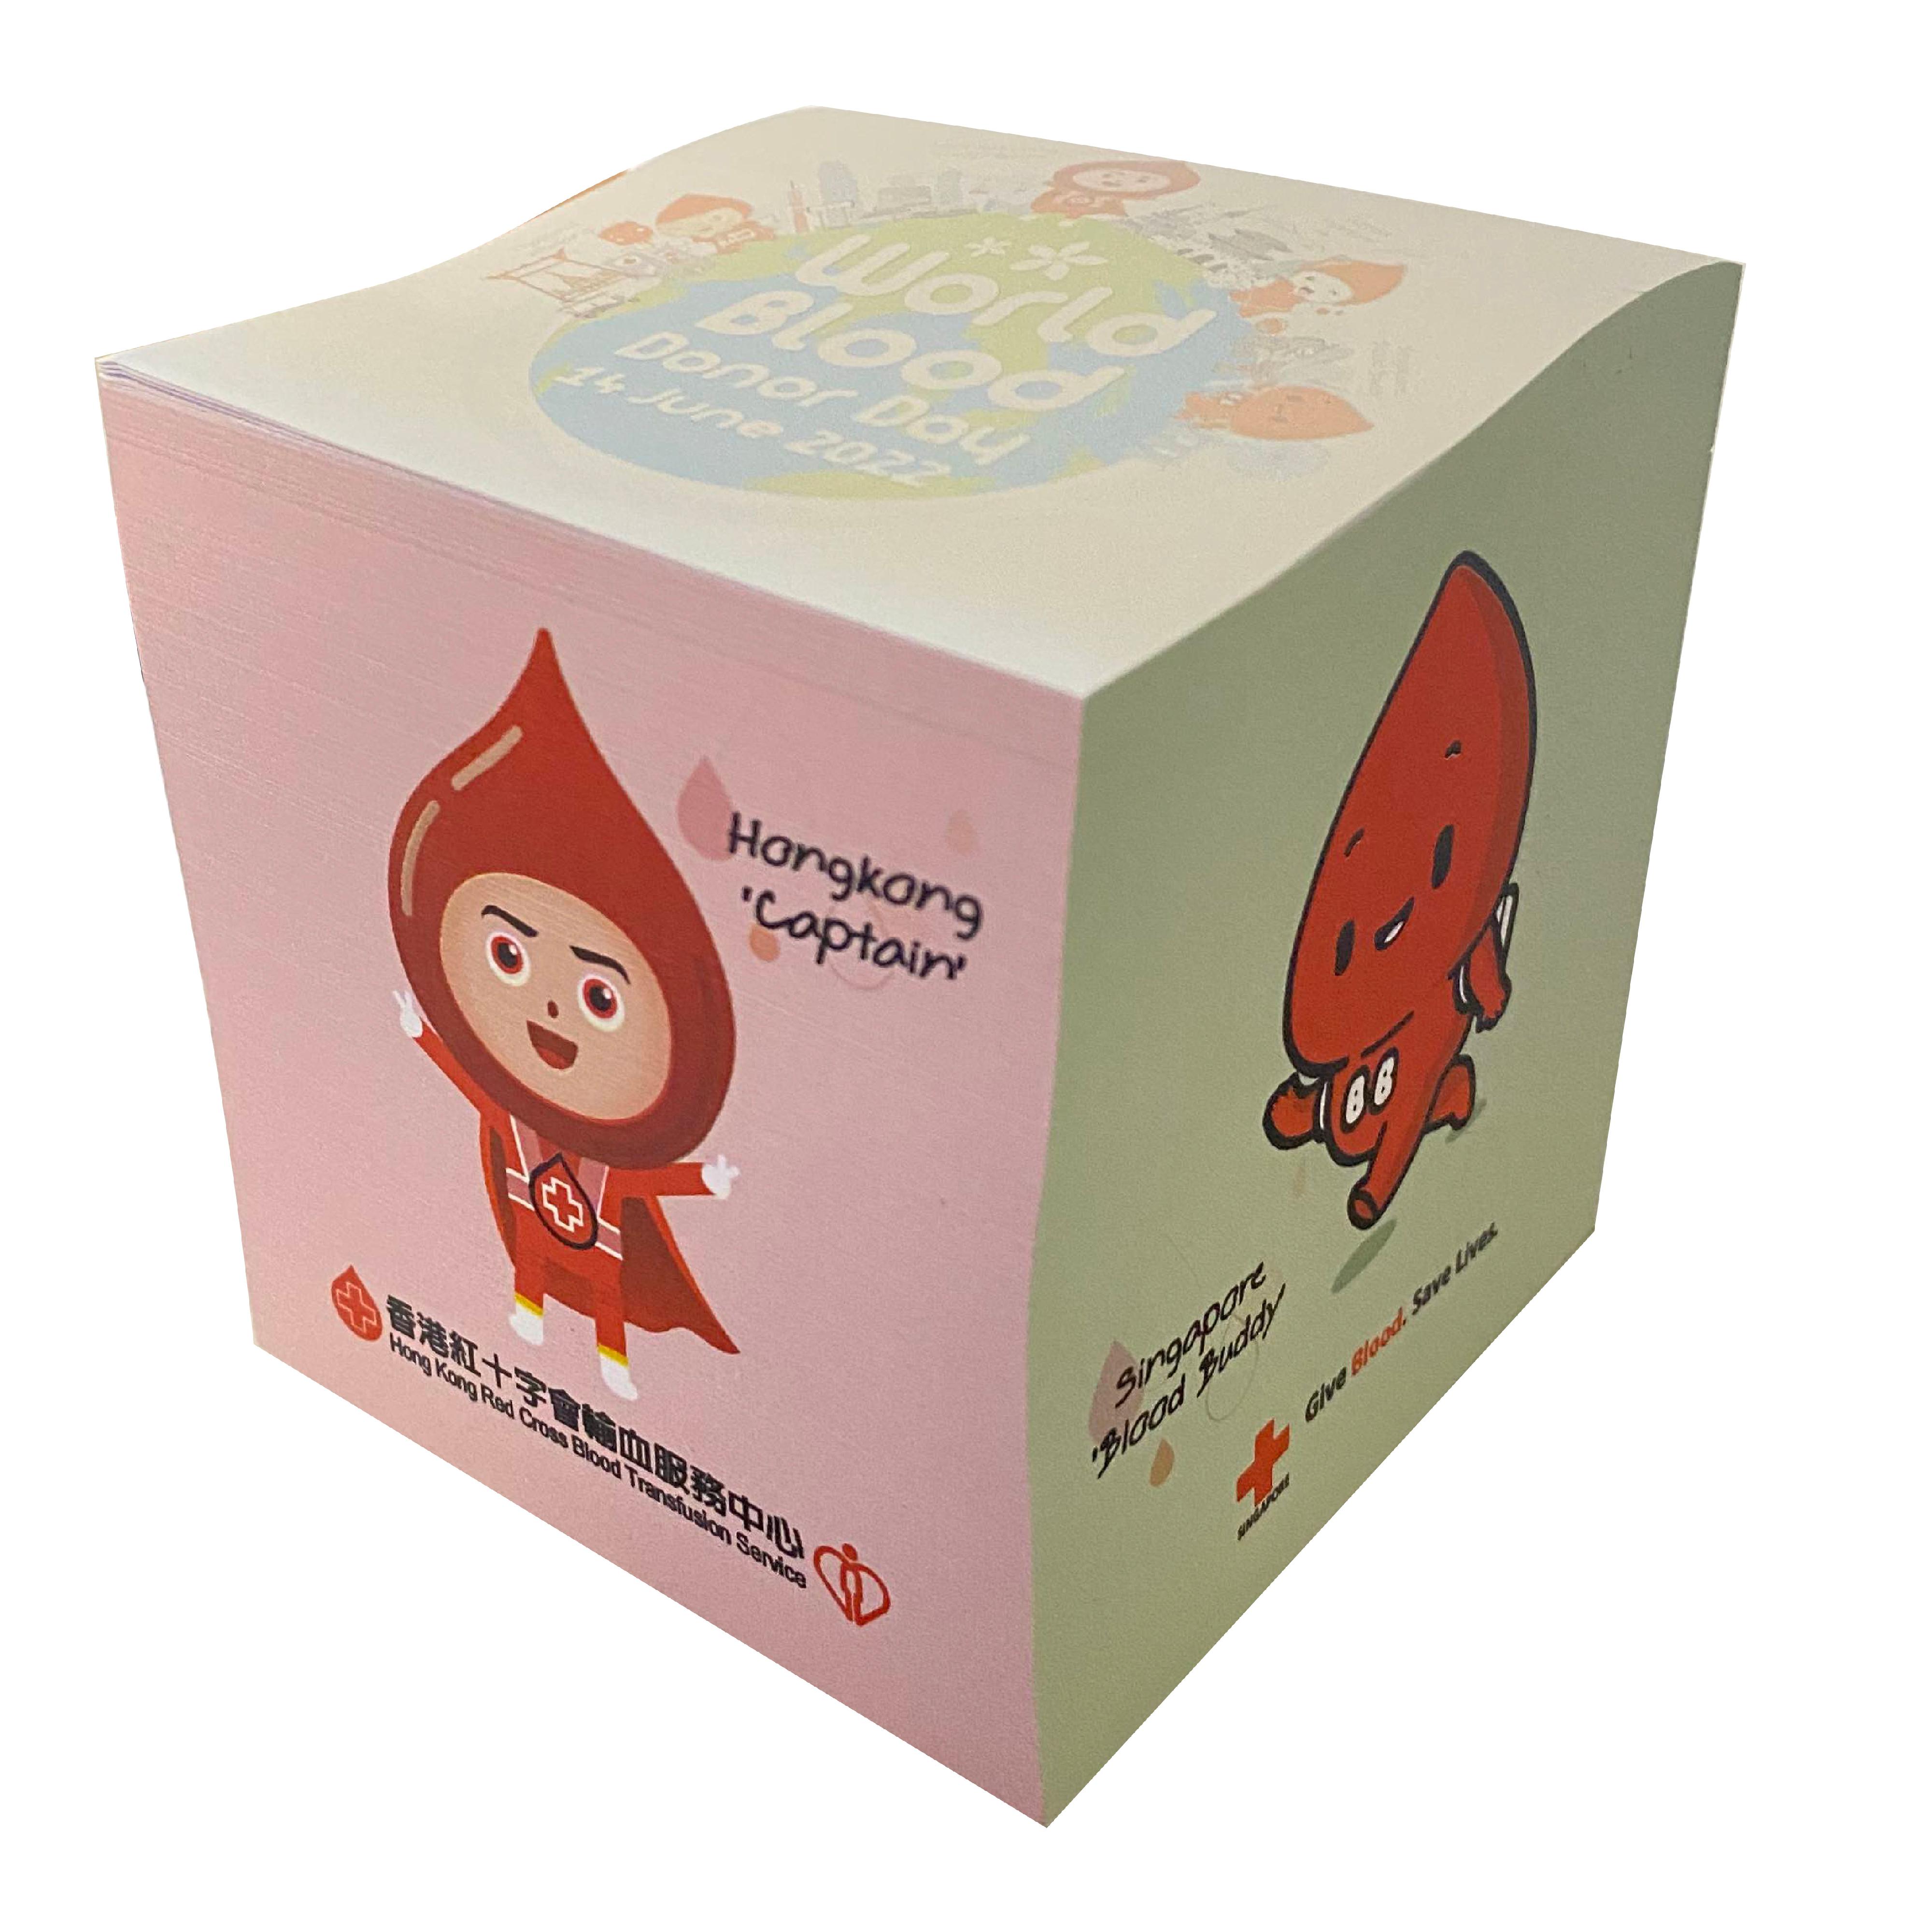 As a token of thanks, every blood donor who donates blood successfully on World Blood Donor Day tomorrow (June 14) will receive a "World Blood Donor Day 2022" Memo Brick, while stocks last.